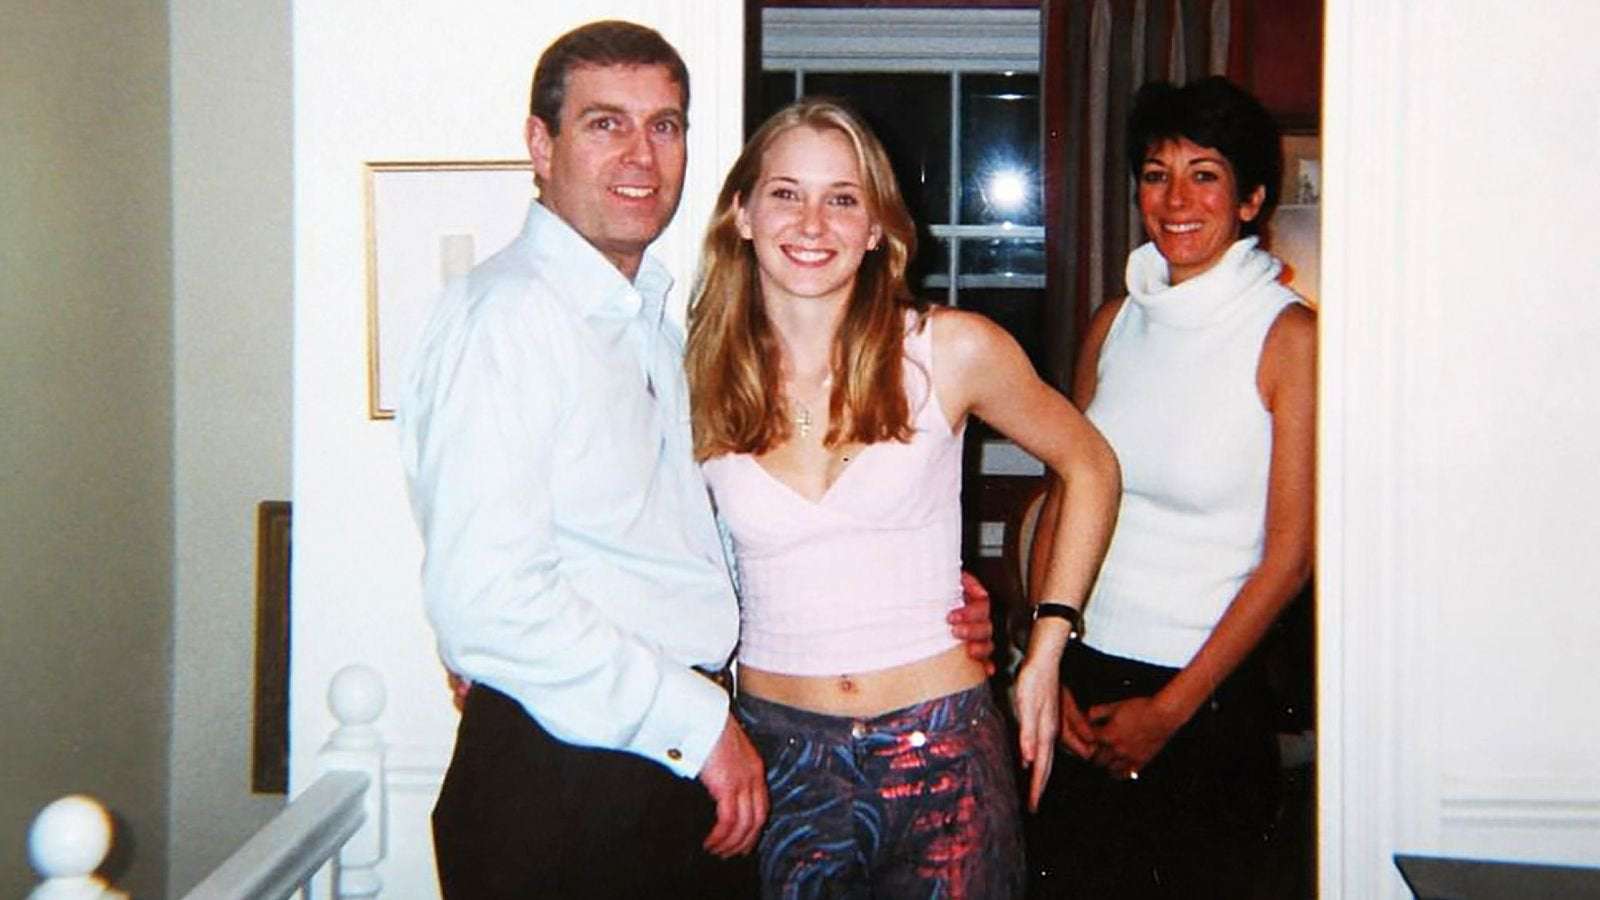 image for Jeffrey Epstein accuser: 'I was trafficked to Prince Andrew'